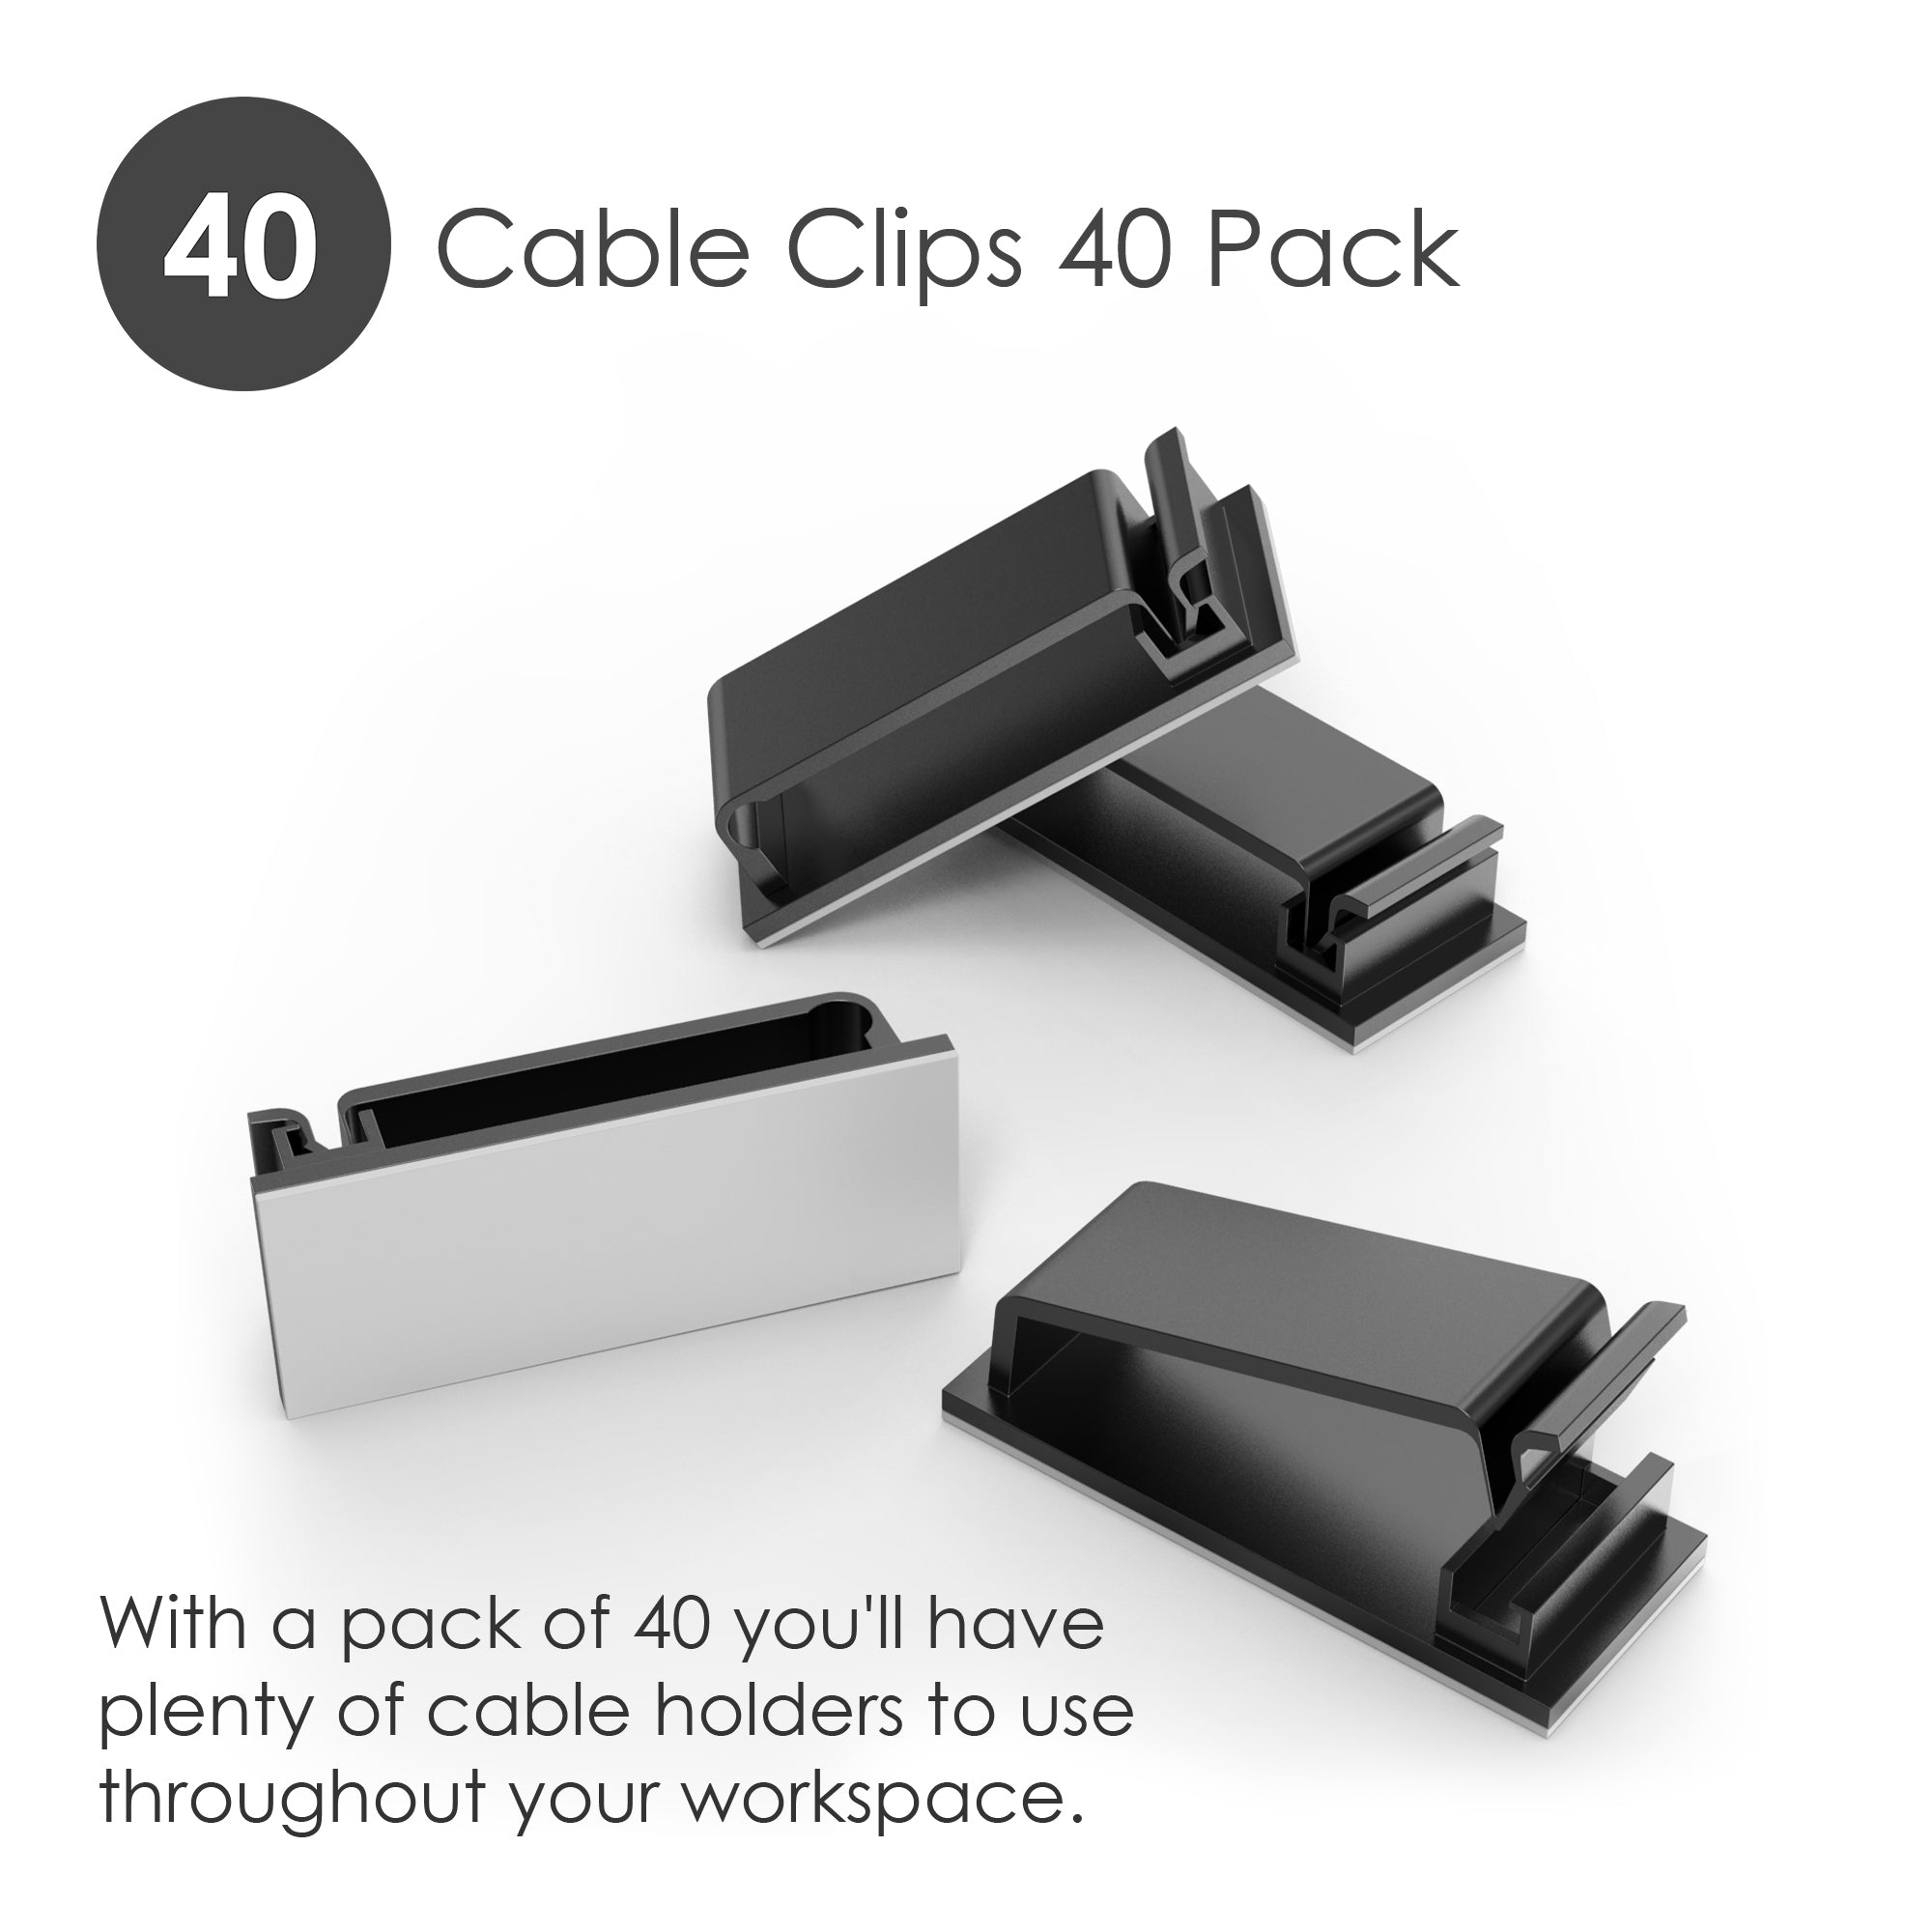 Enfold Cable Clips 40 Pack